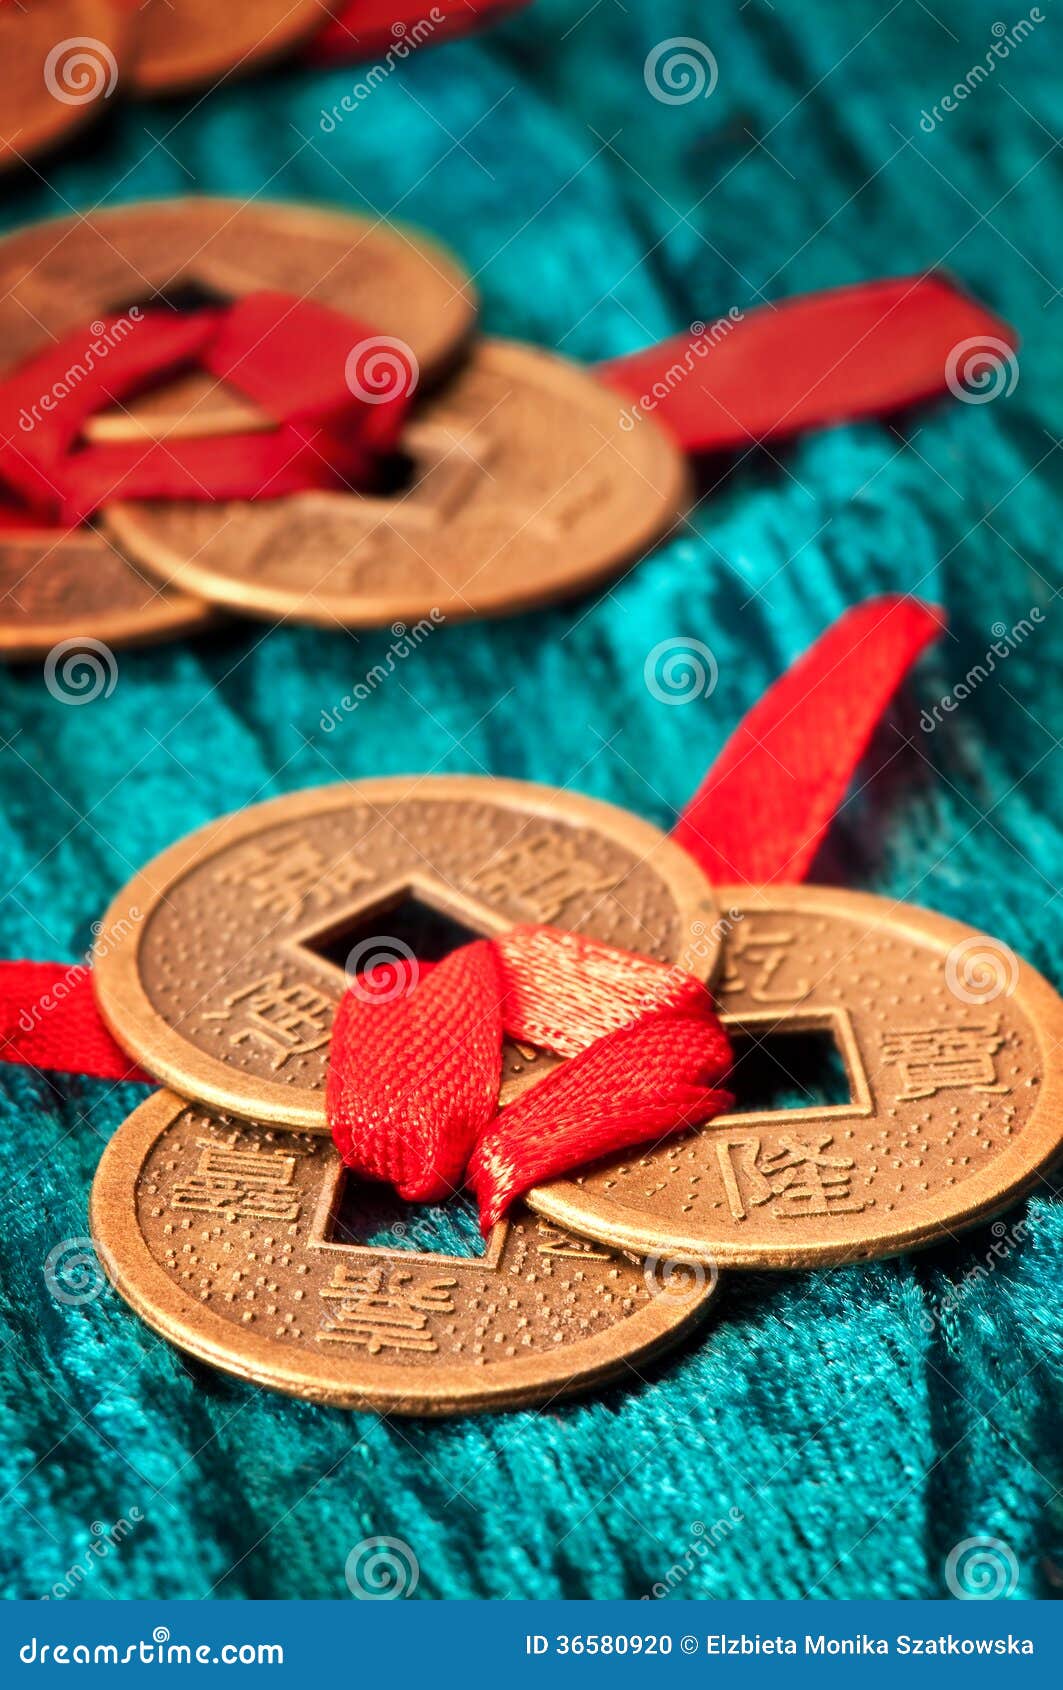 http://thumbs.dreamstime.com/z/chinese-lucky-coins-tied-red-ribbon-36580920.jpg